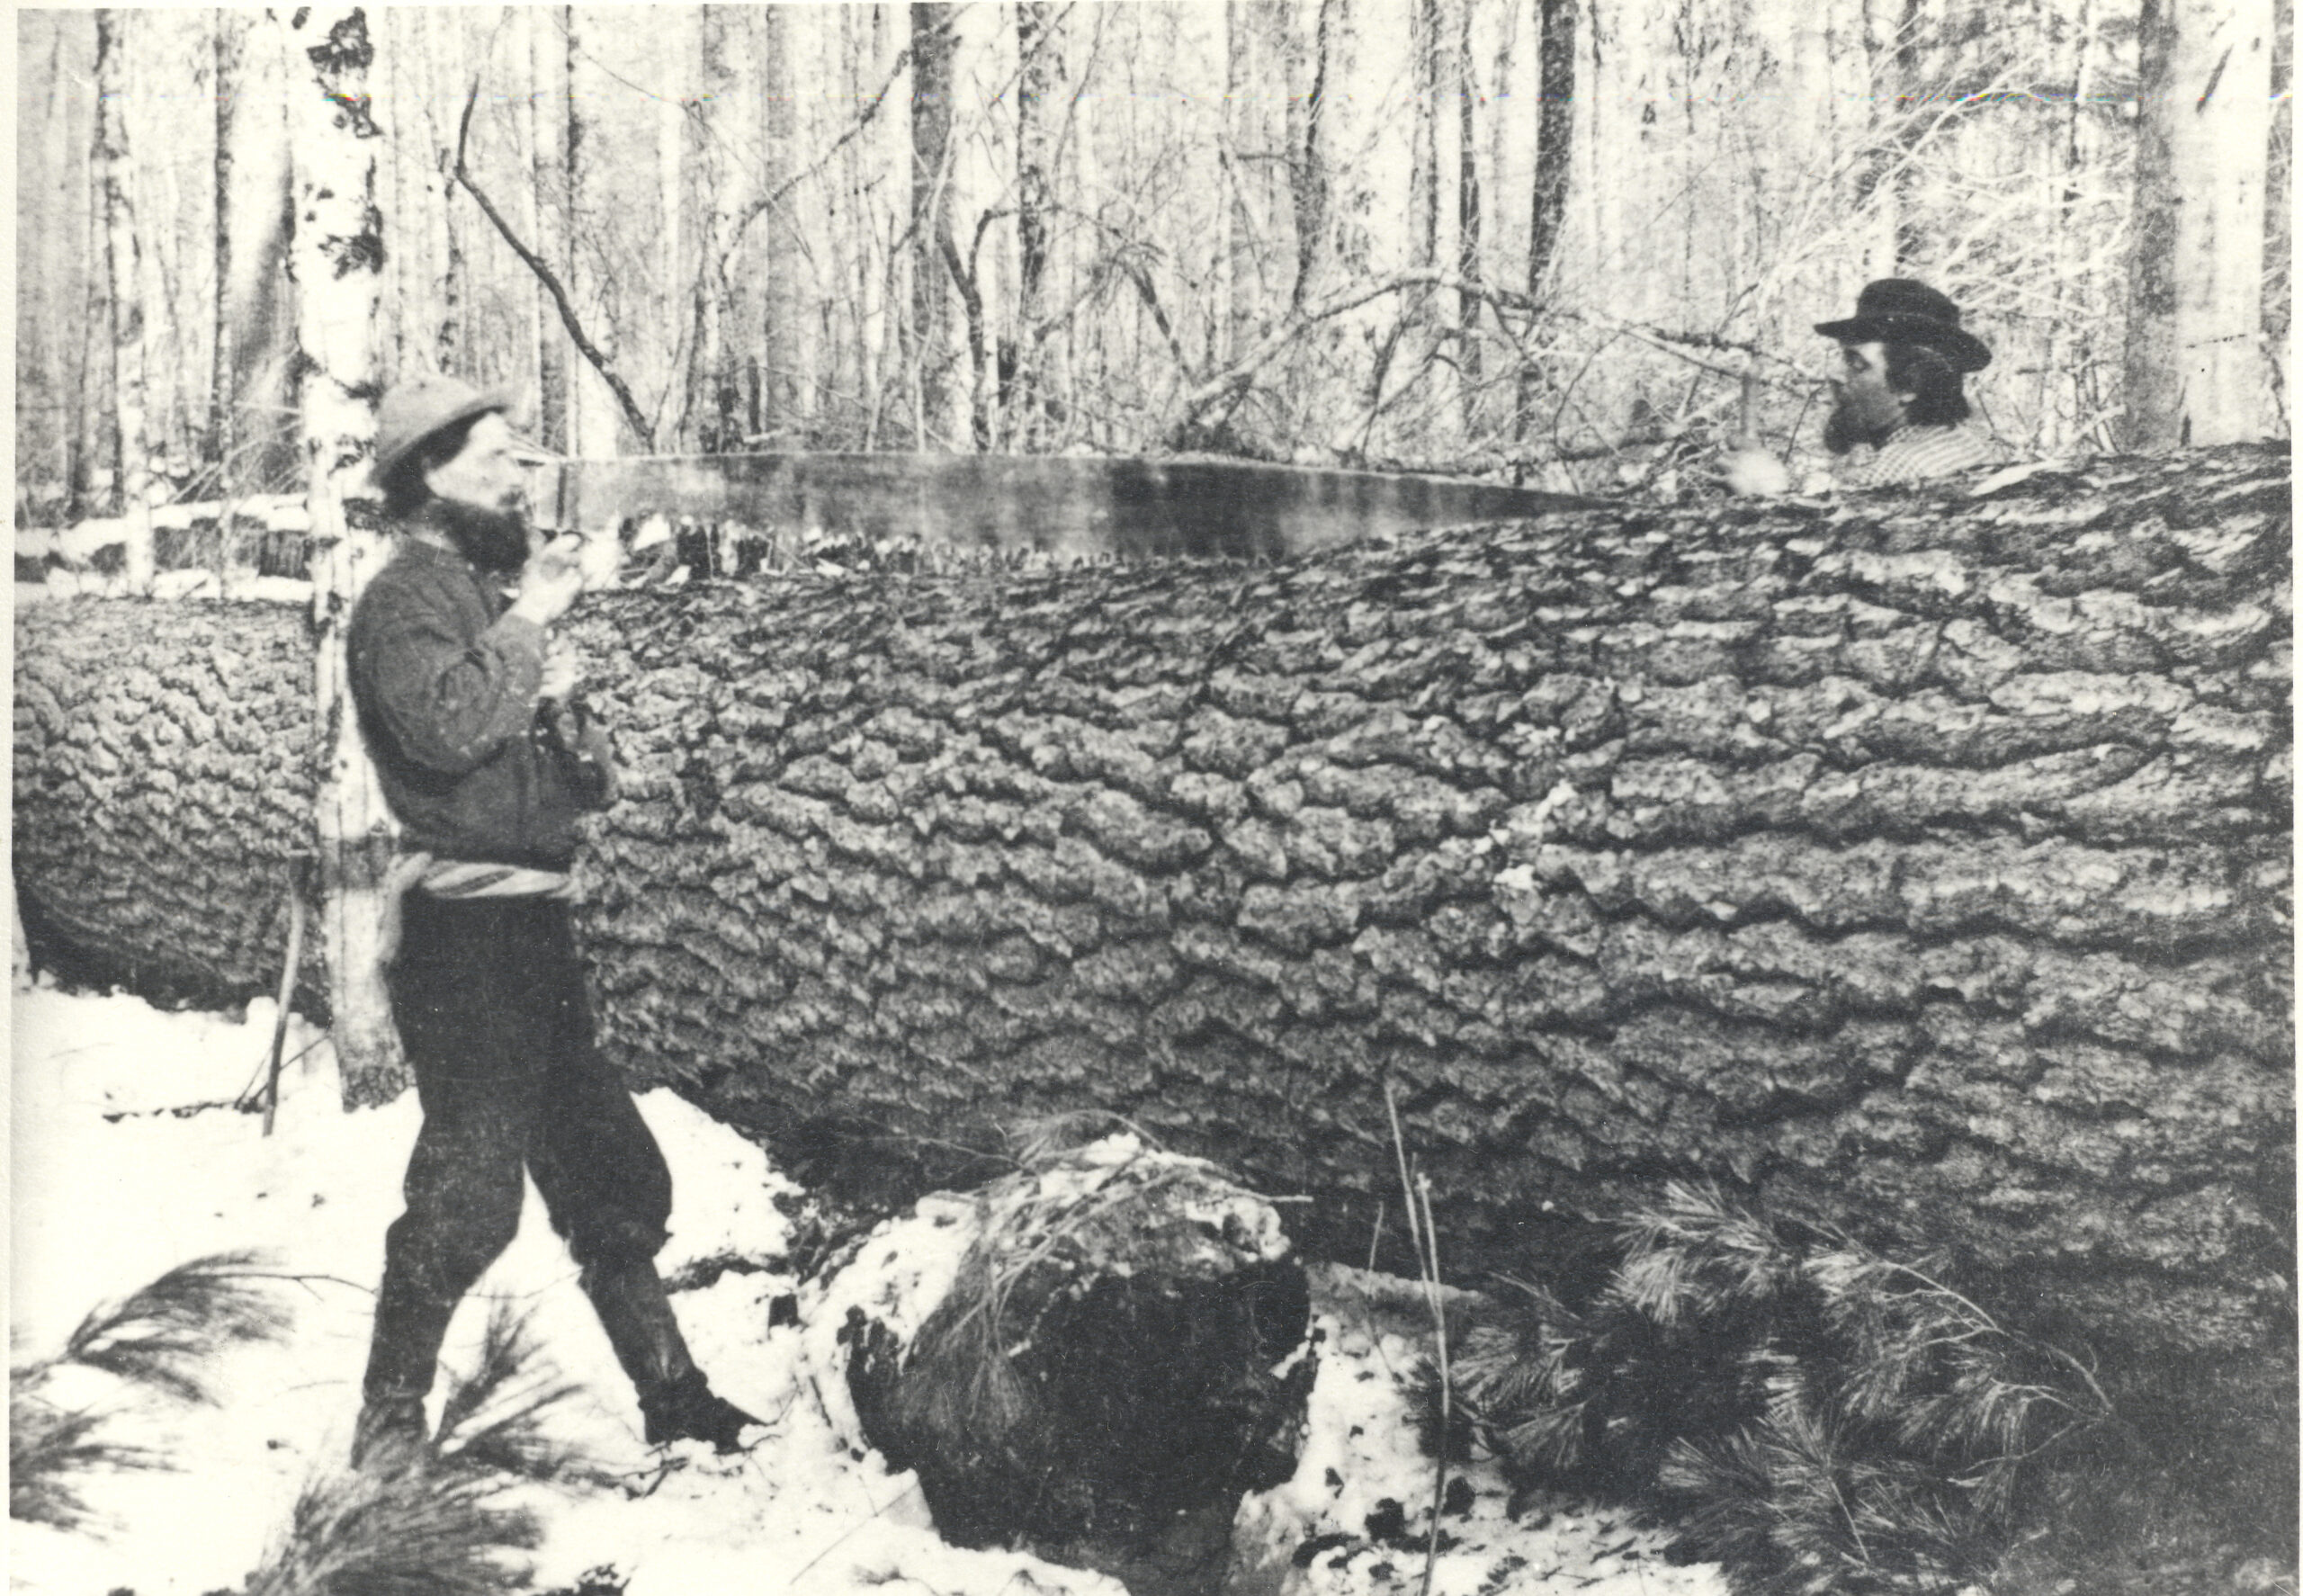 Bucking up a large white pine with a crosscut saw, circa 1890s